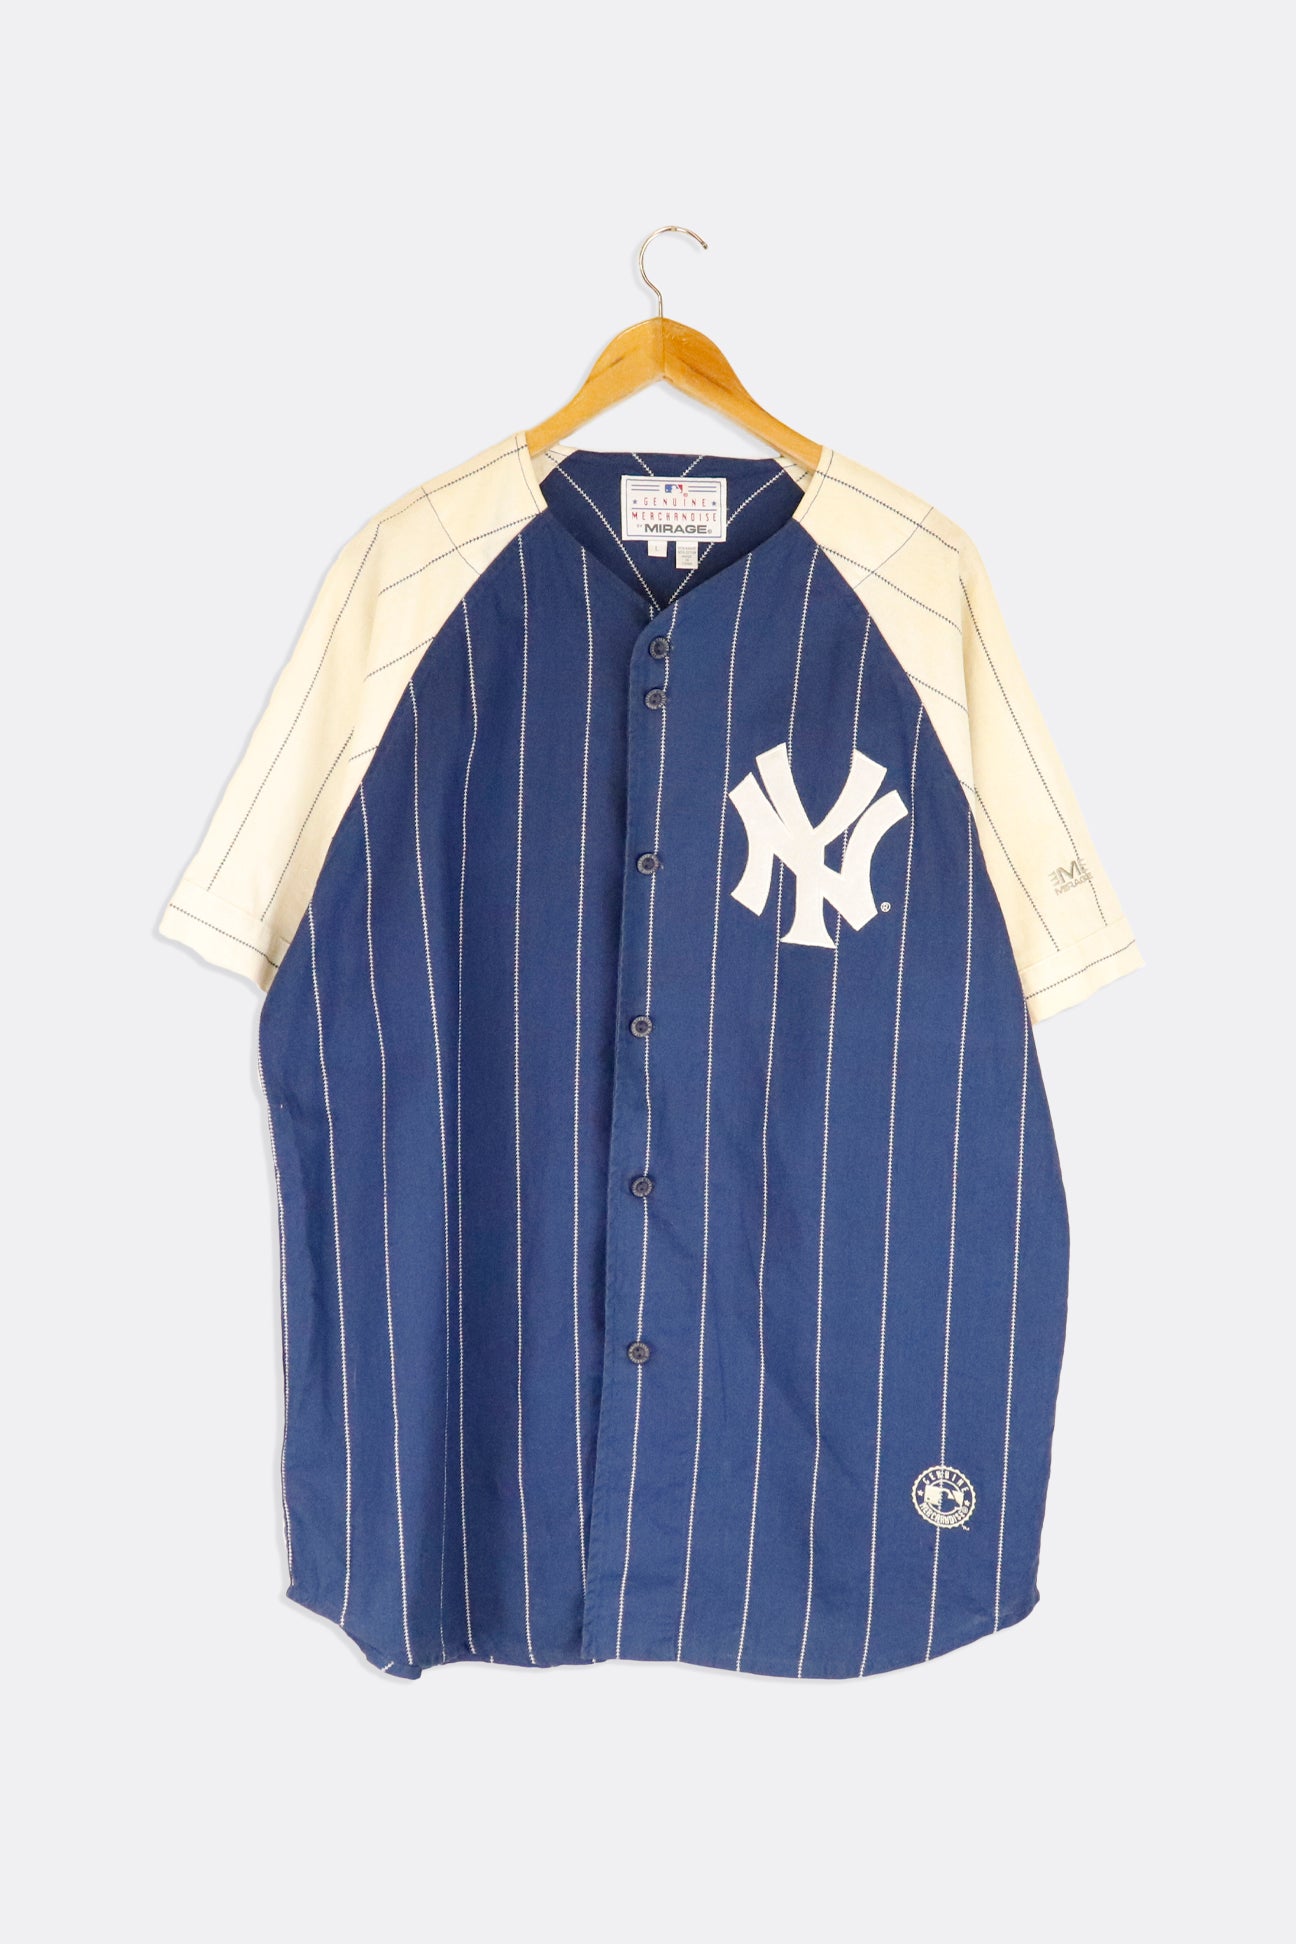 Vintage MLB New York Genuine Merch By Mirage Base Ball Jersey Sz L – F As  In Frank Vintage